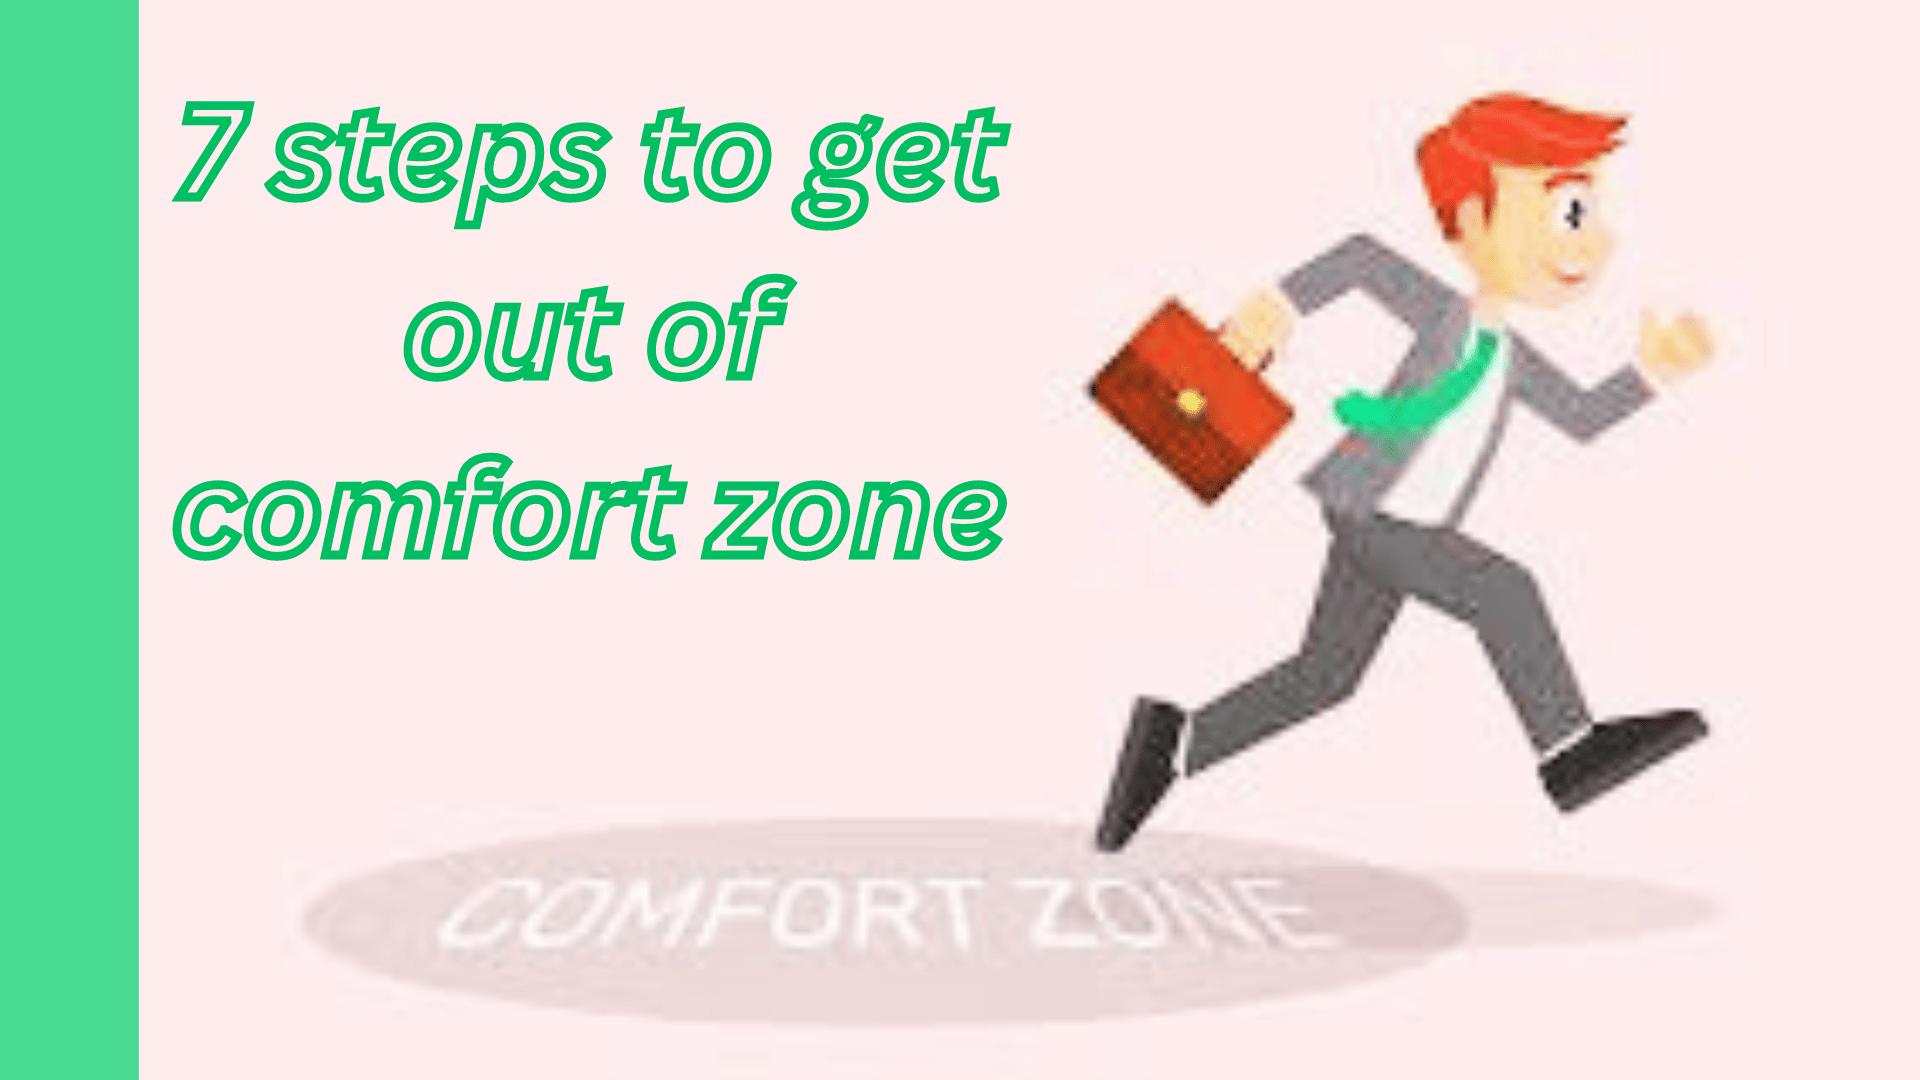 7 steps to get out of comfort zone